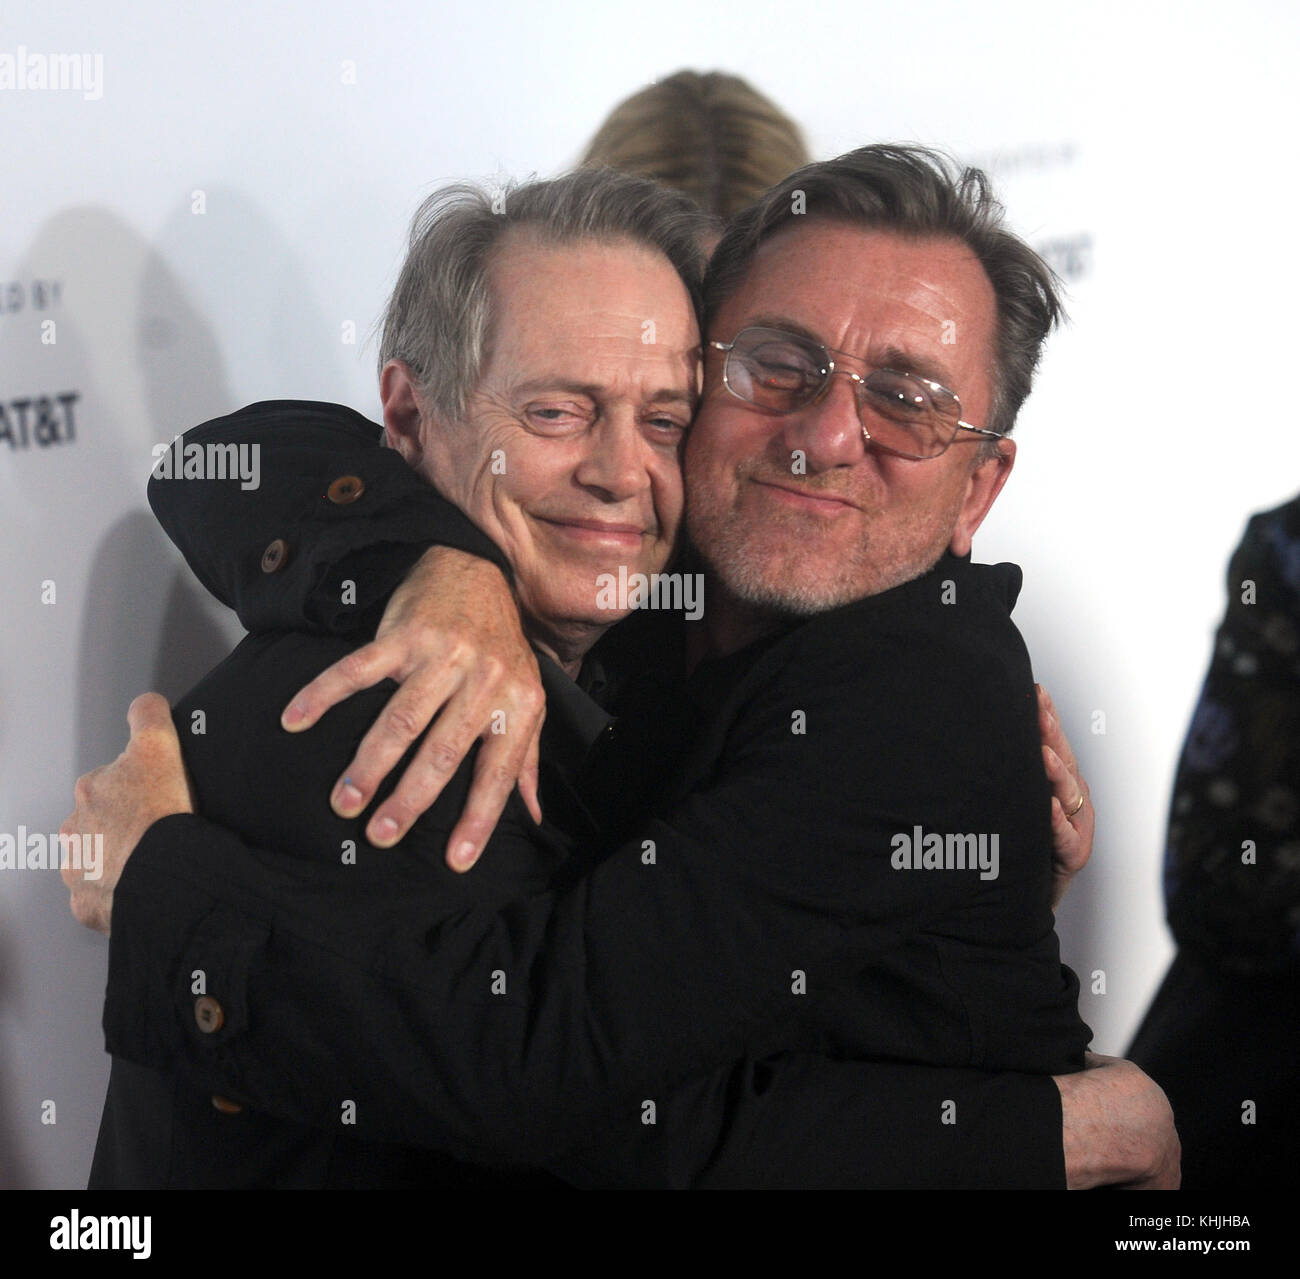 NEW YORK, NY - APRIL 28: Steve Buscemi, Tim Roth attends 'Reservoir Dogs'  25th Anniversary Screening during 2017 Tribeca Film Festival at The Beacon  Theatre on April 28, 2017 in New York